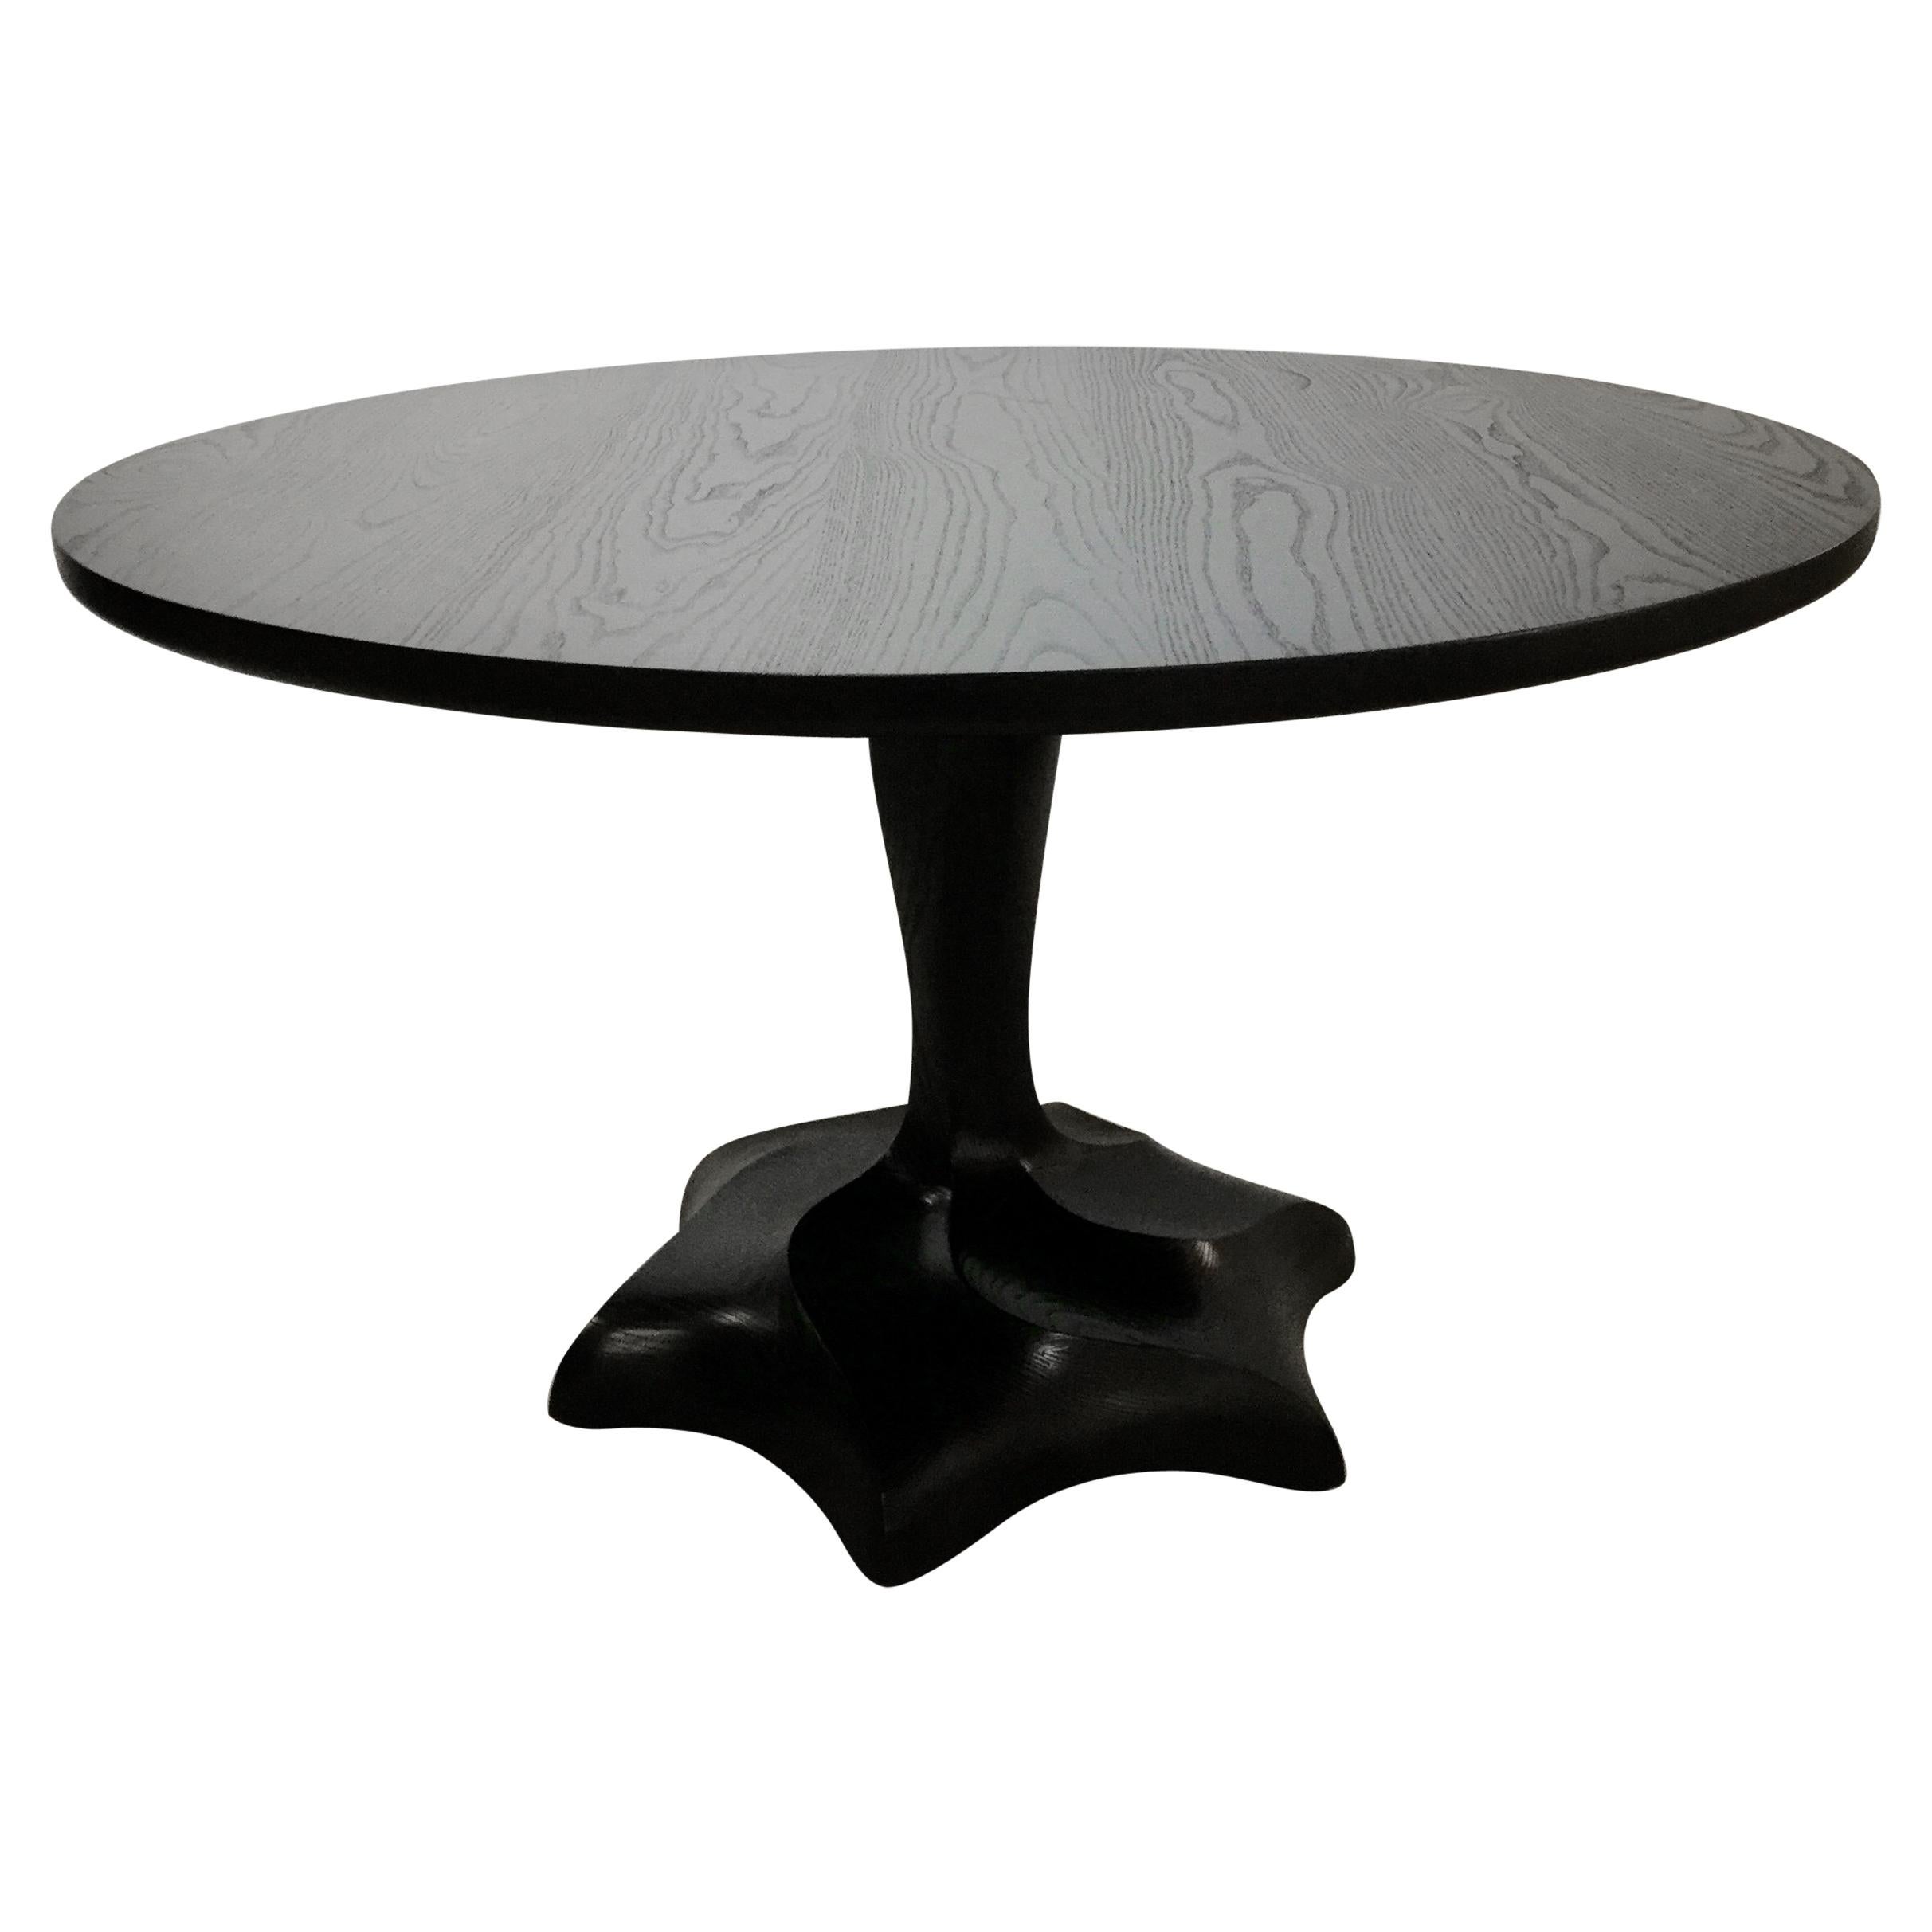 Hand Carved and Ebonized Center / Dining Table, Caleb Woodard, 2018 For Sale